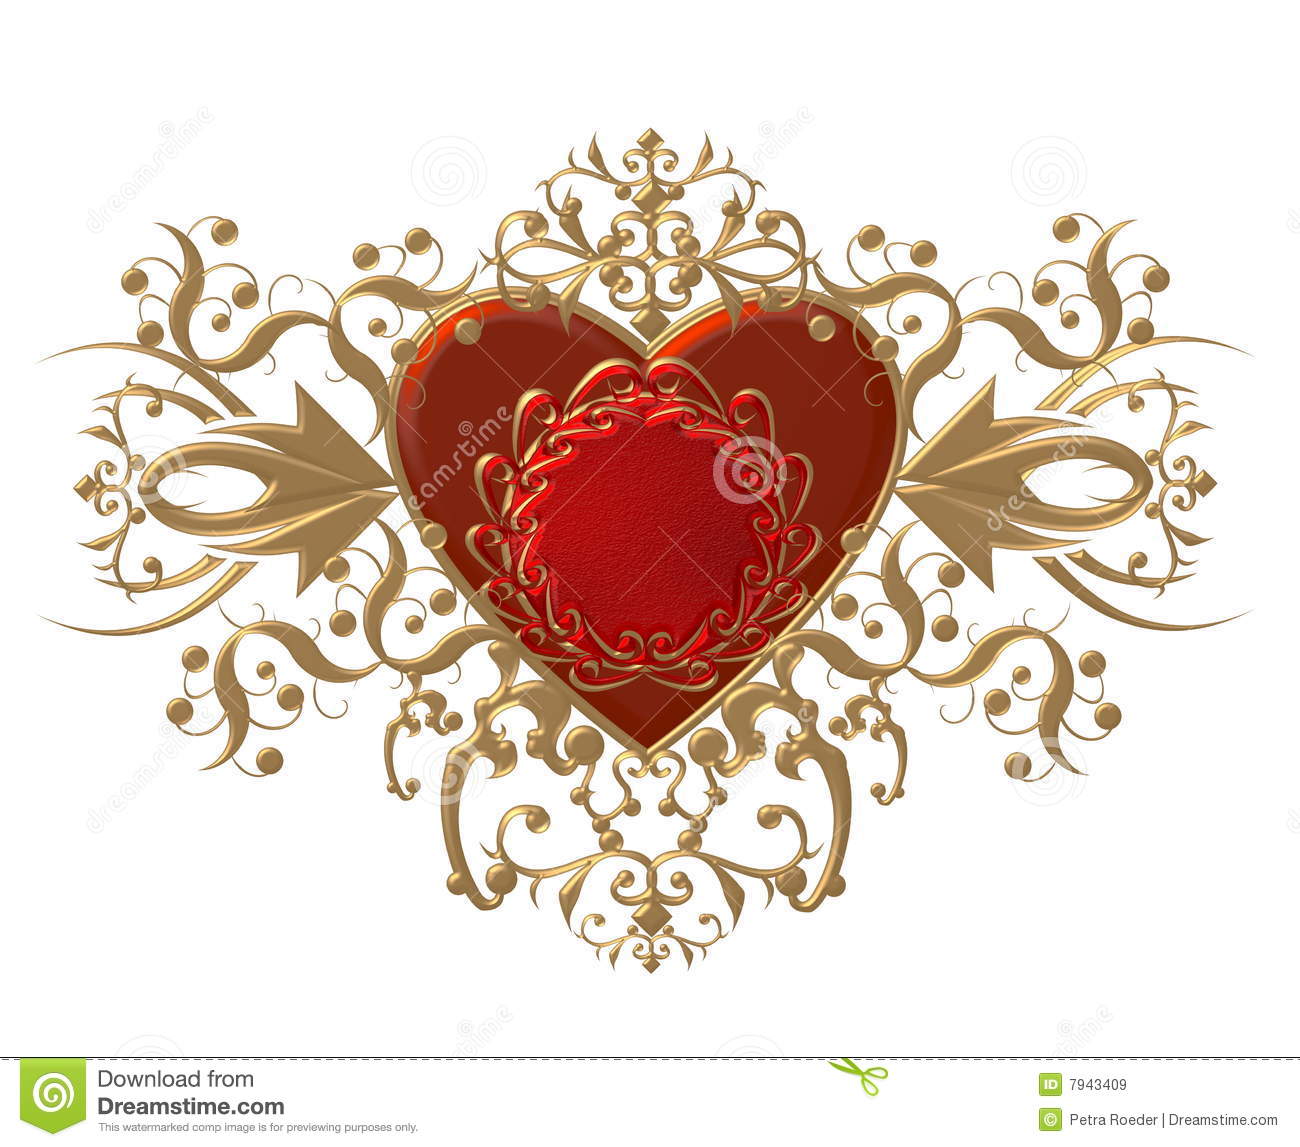 An Illustration Of A Red Heart With Gold Filigree Surrounding It